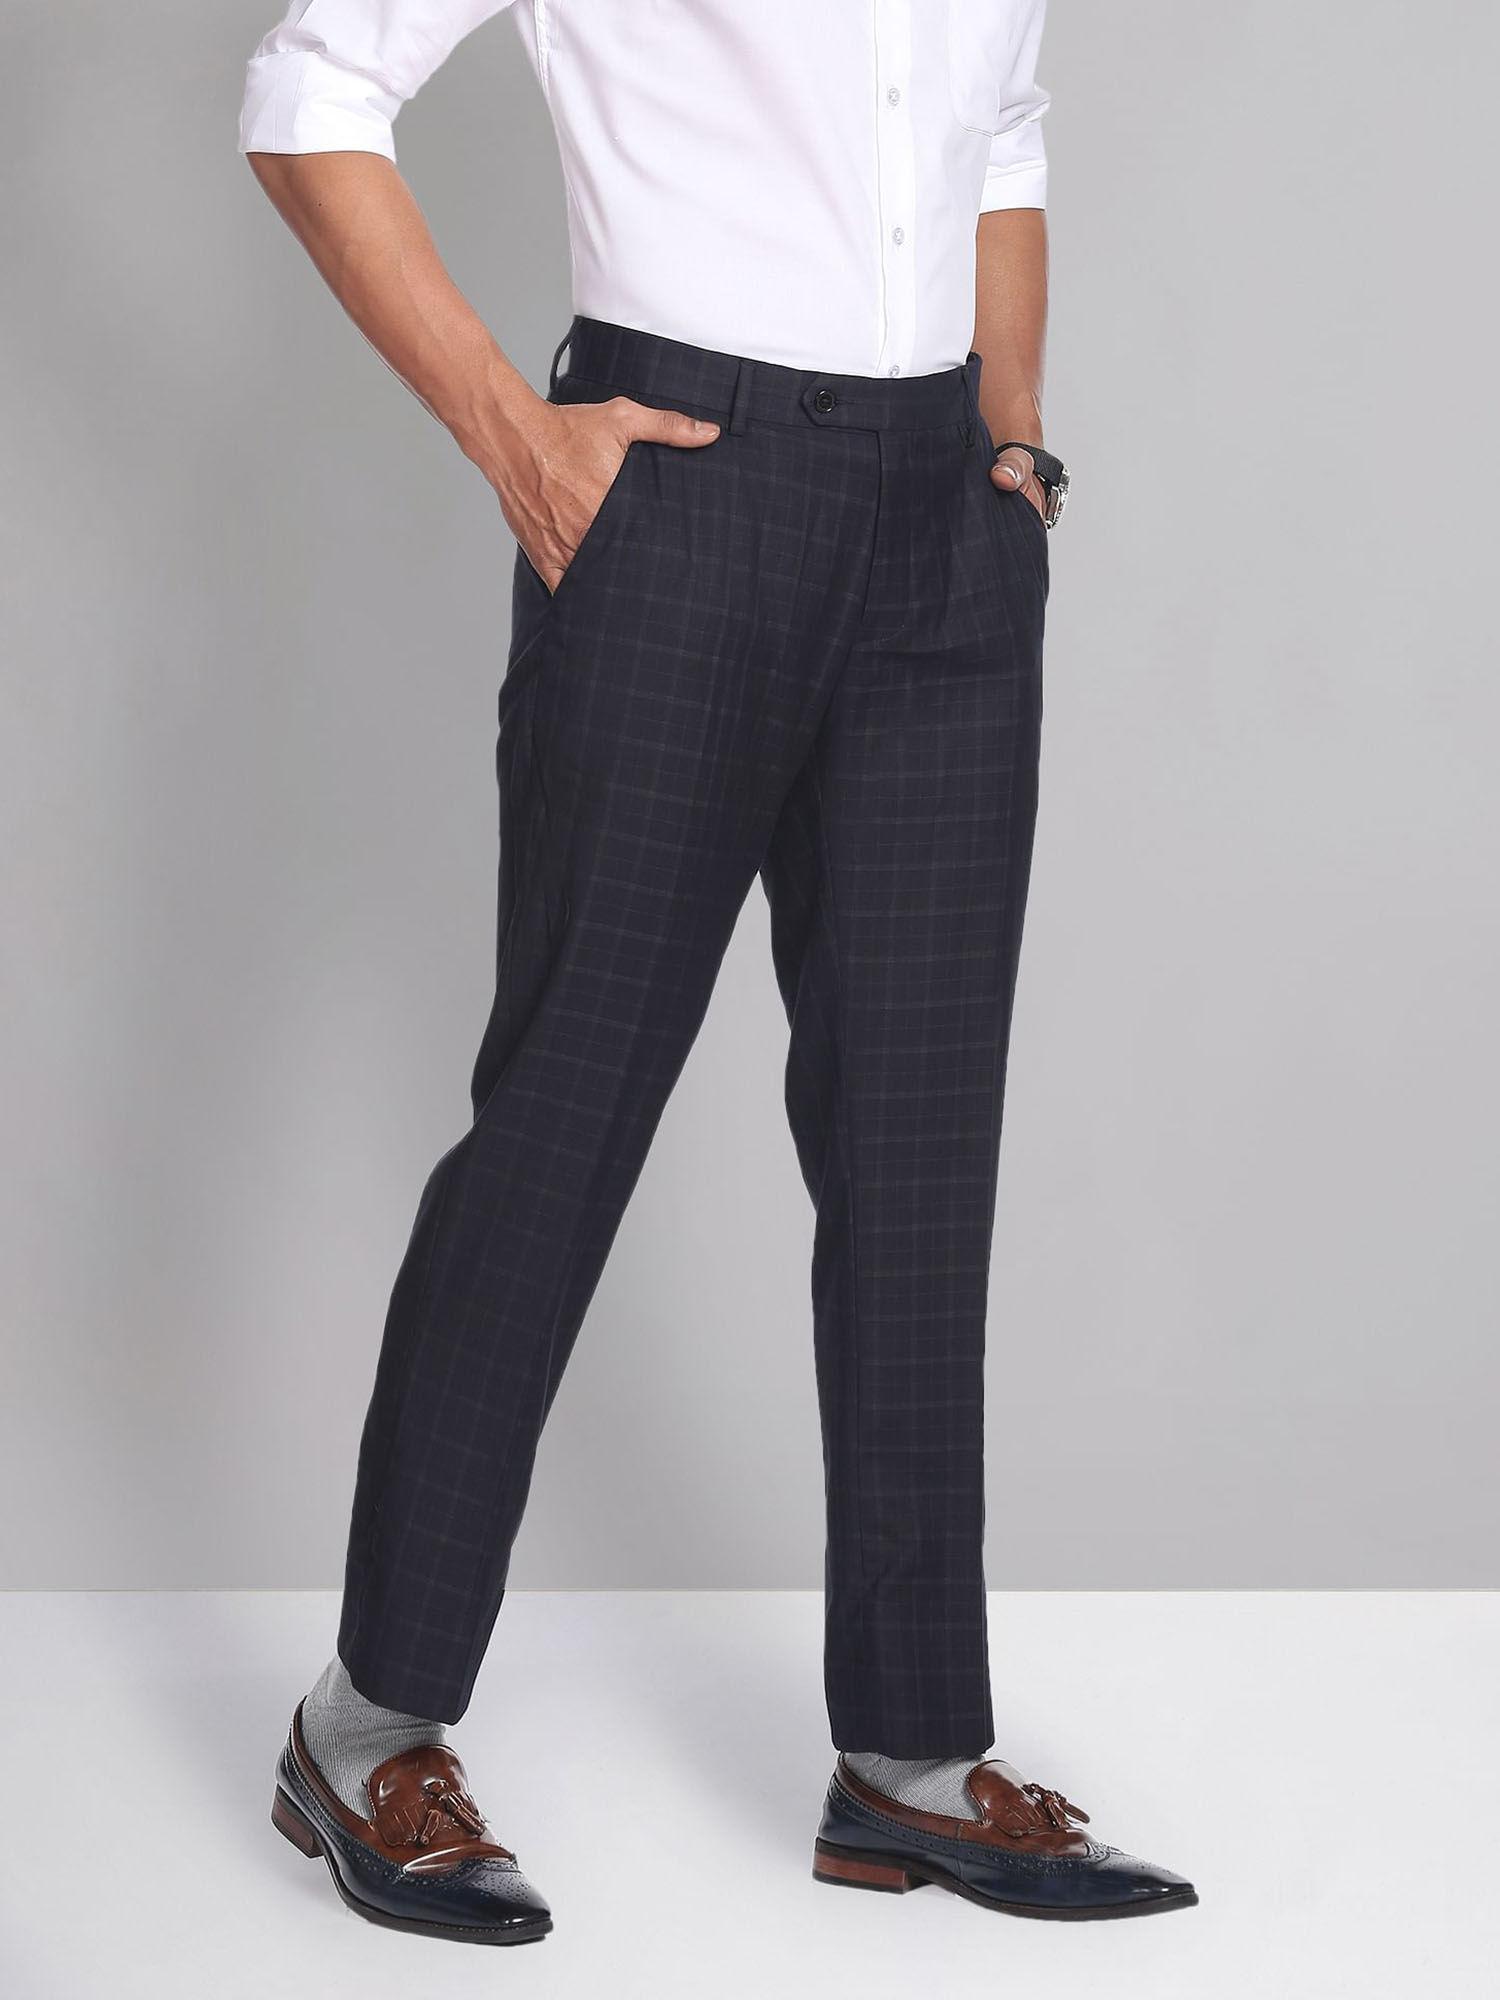 Grid Tattersall Check Twill Formal Trousers Black